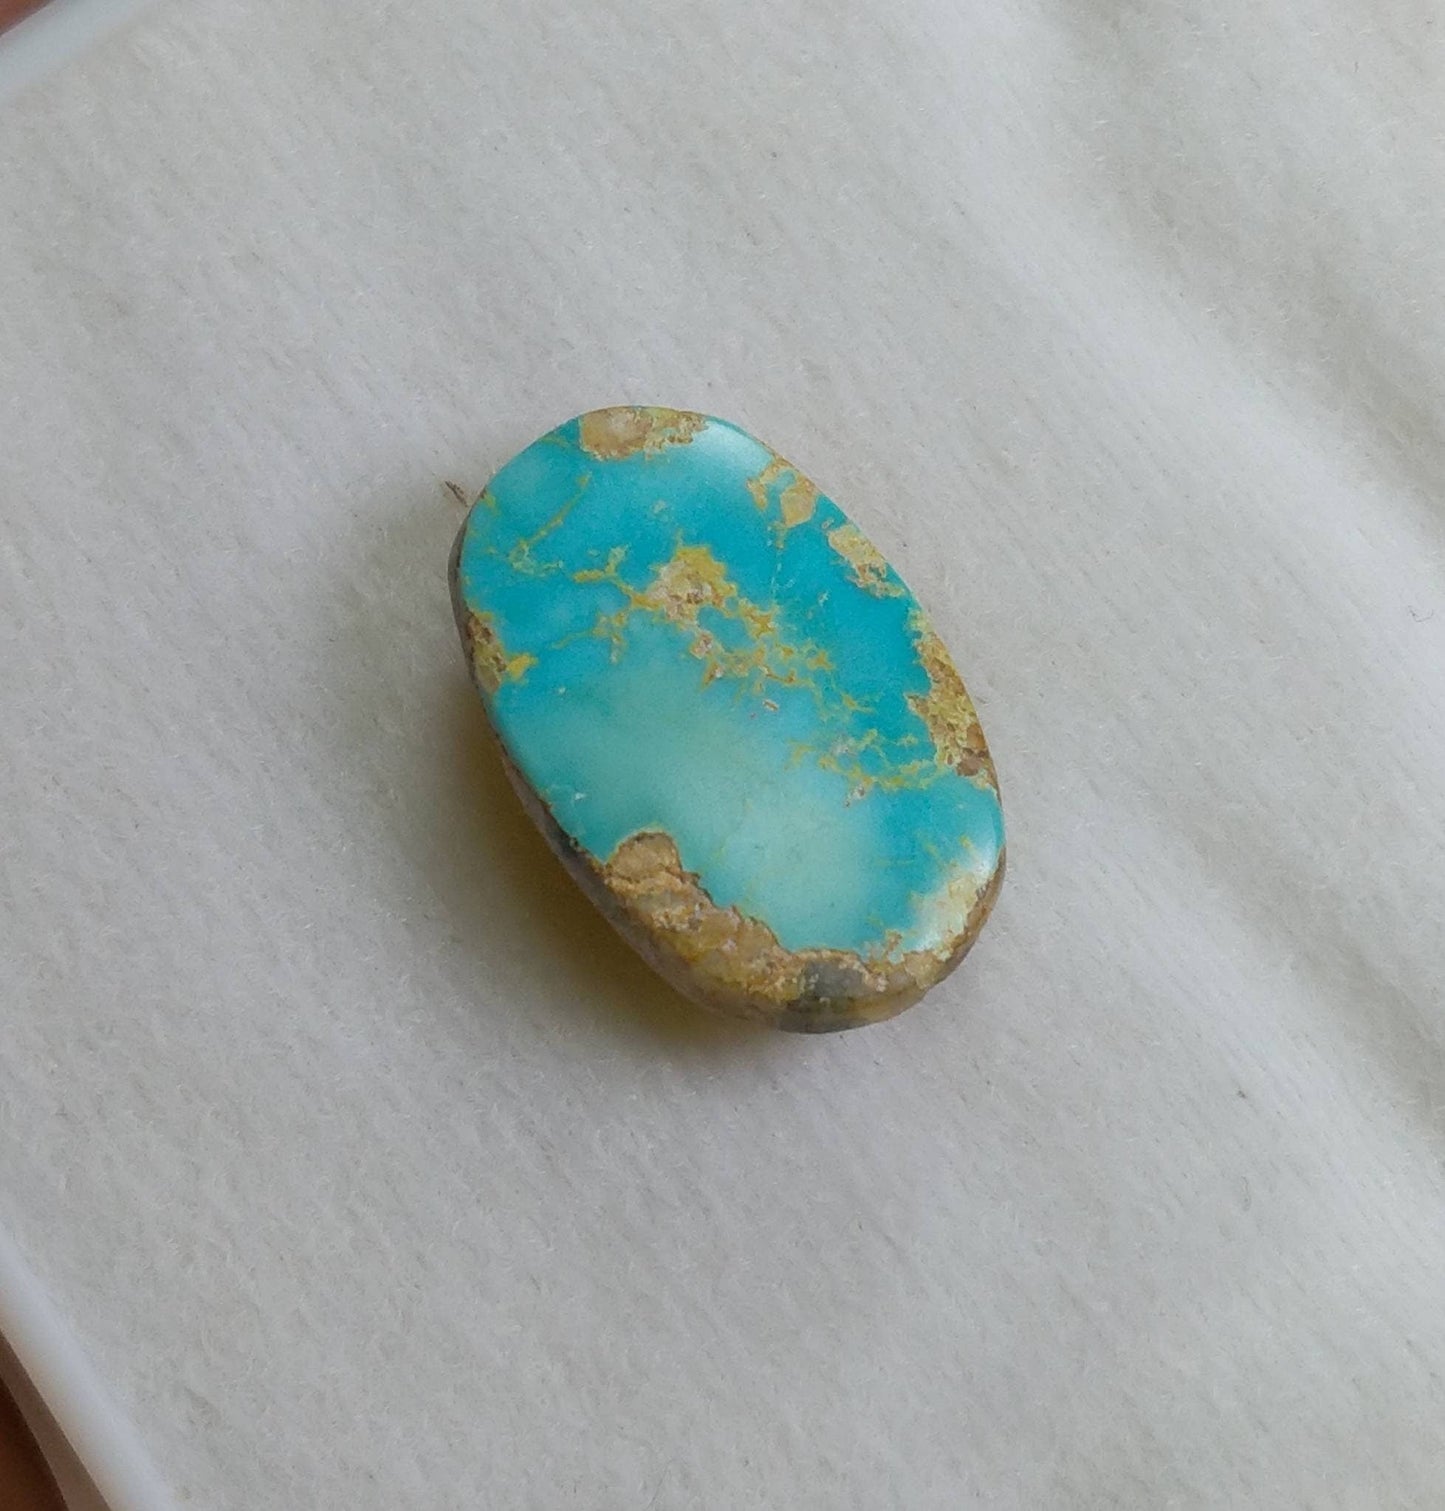 ARSAA GEMS AND MINERALSNatural top quality beautiful 11 carats untreated unheated oval shape turquoise cabochon - Premium  from ARSAA GEMS AND MINERALS - Just $11.00! Shop now at ARSAA GEMS AND MINERALS